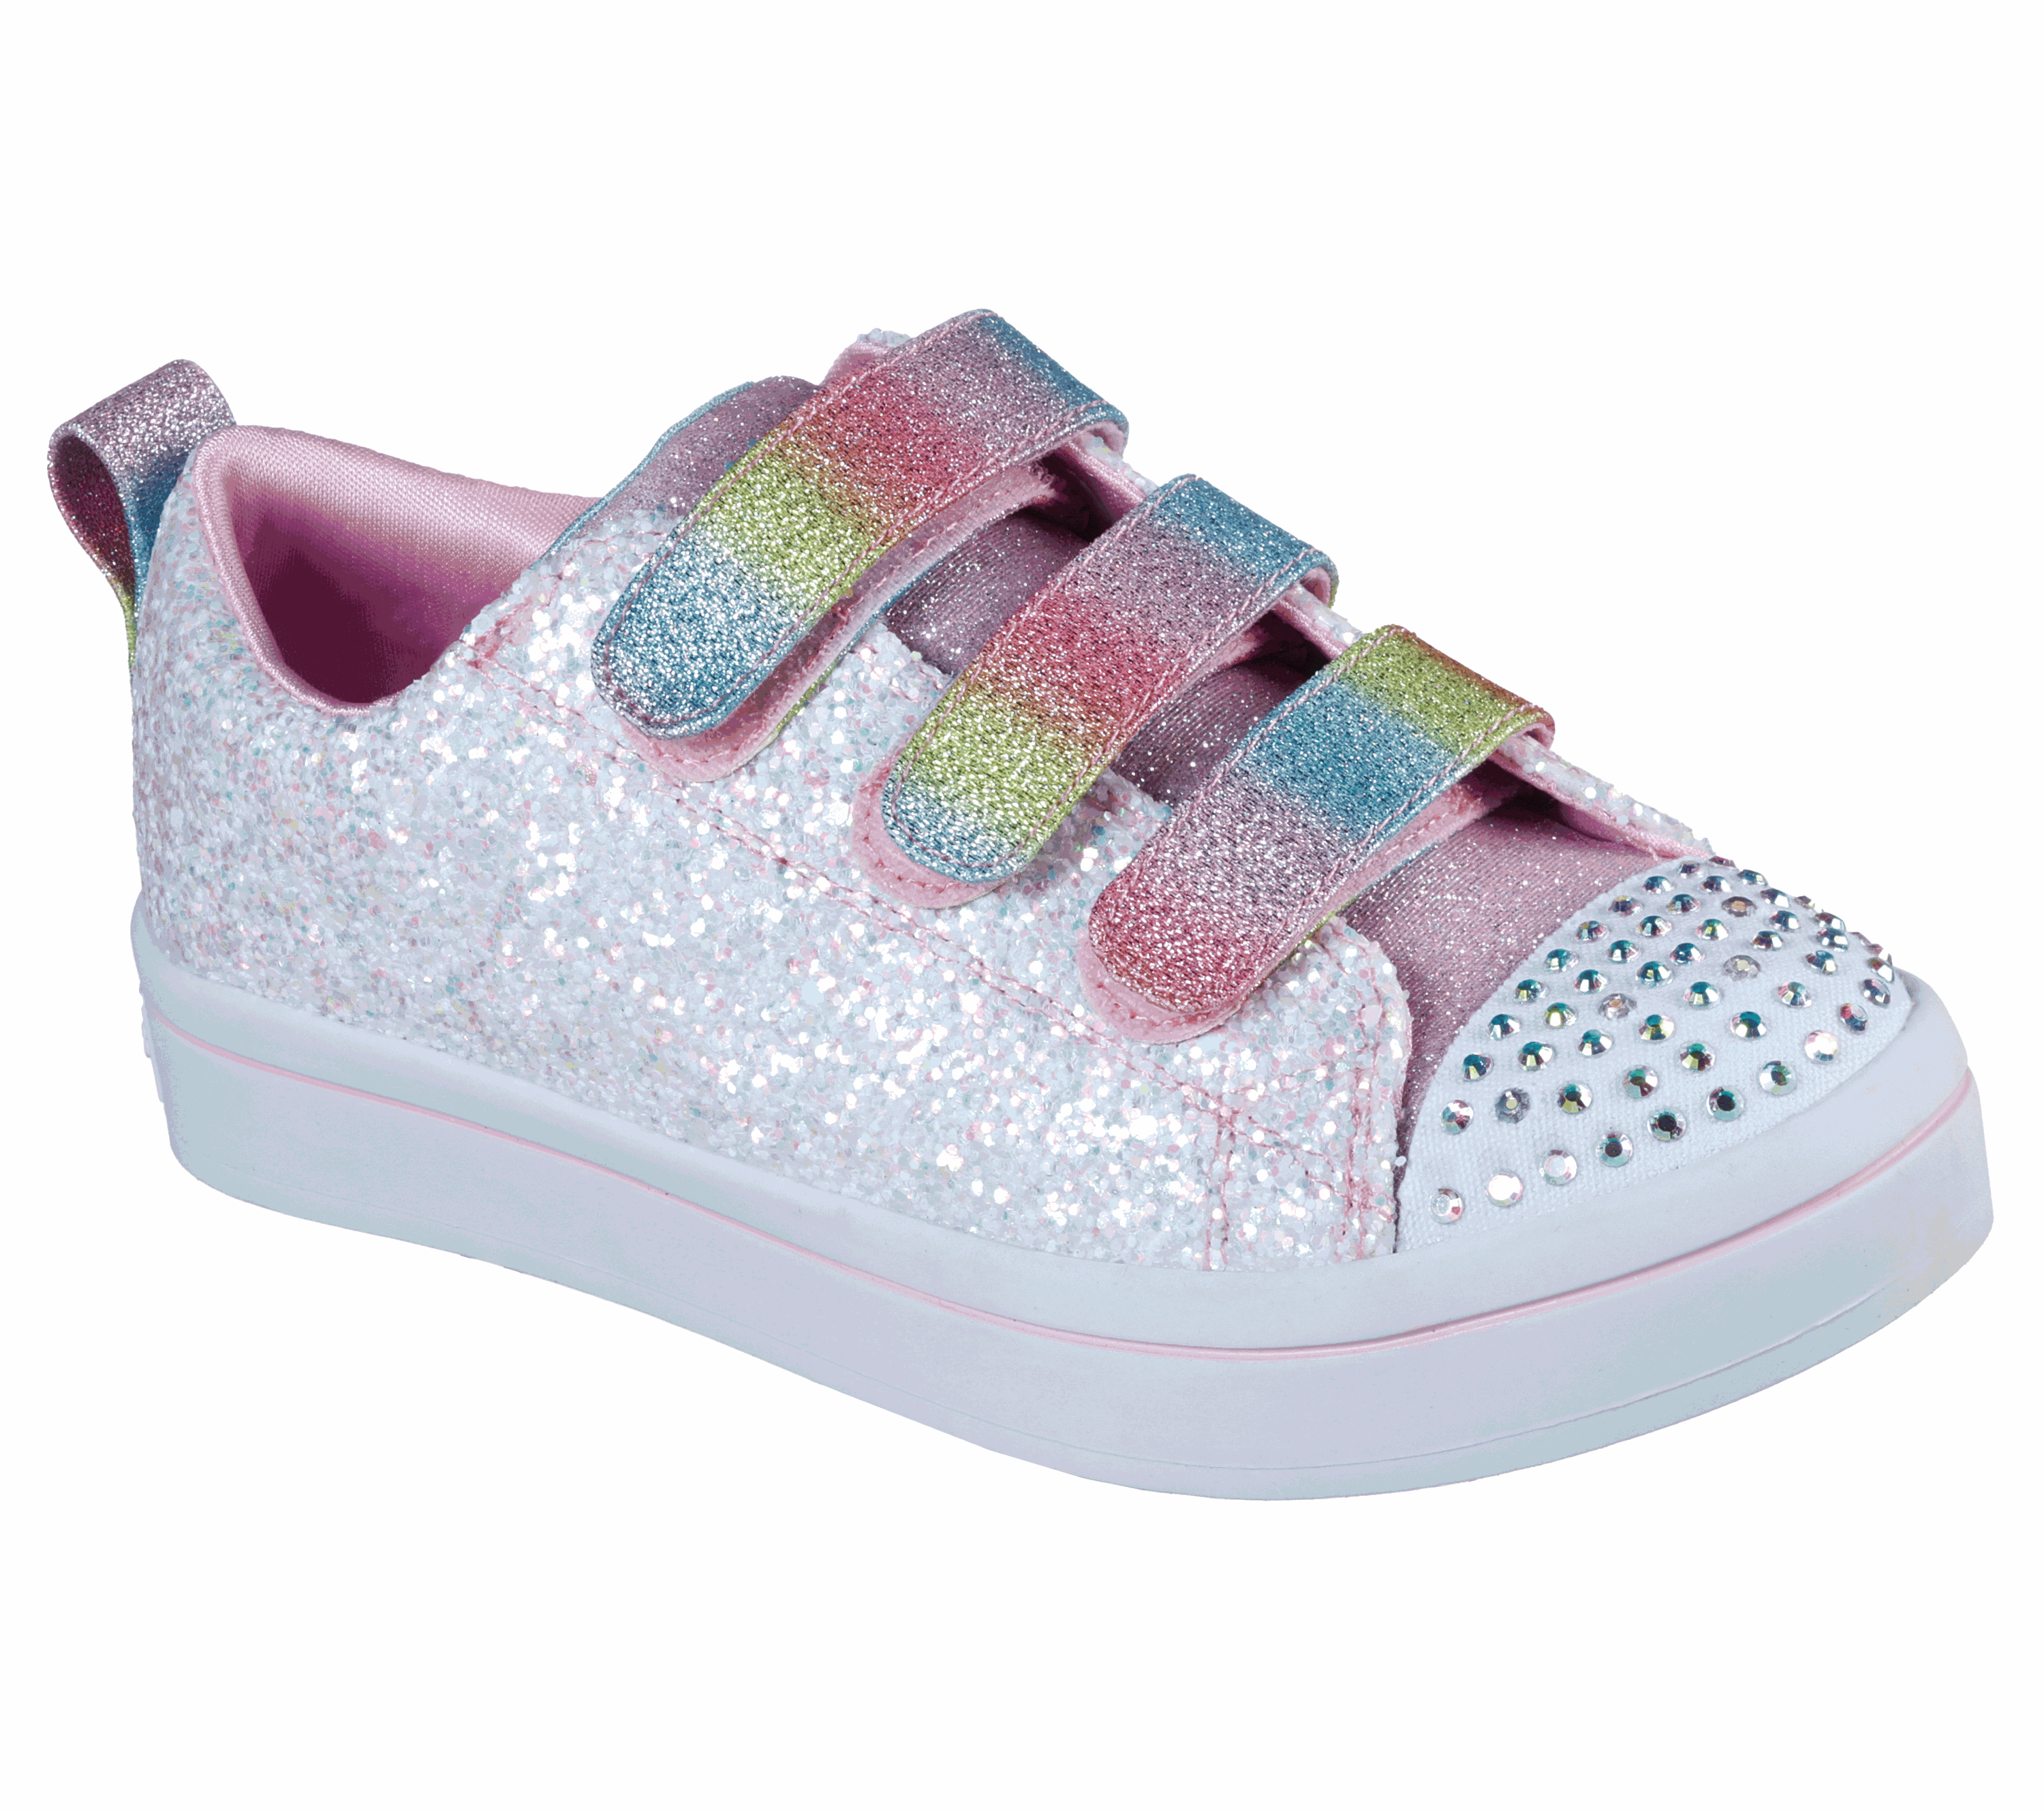 twinkle toes shoes size 11